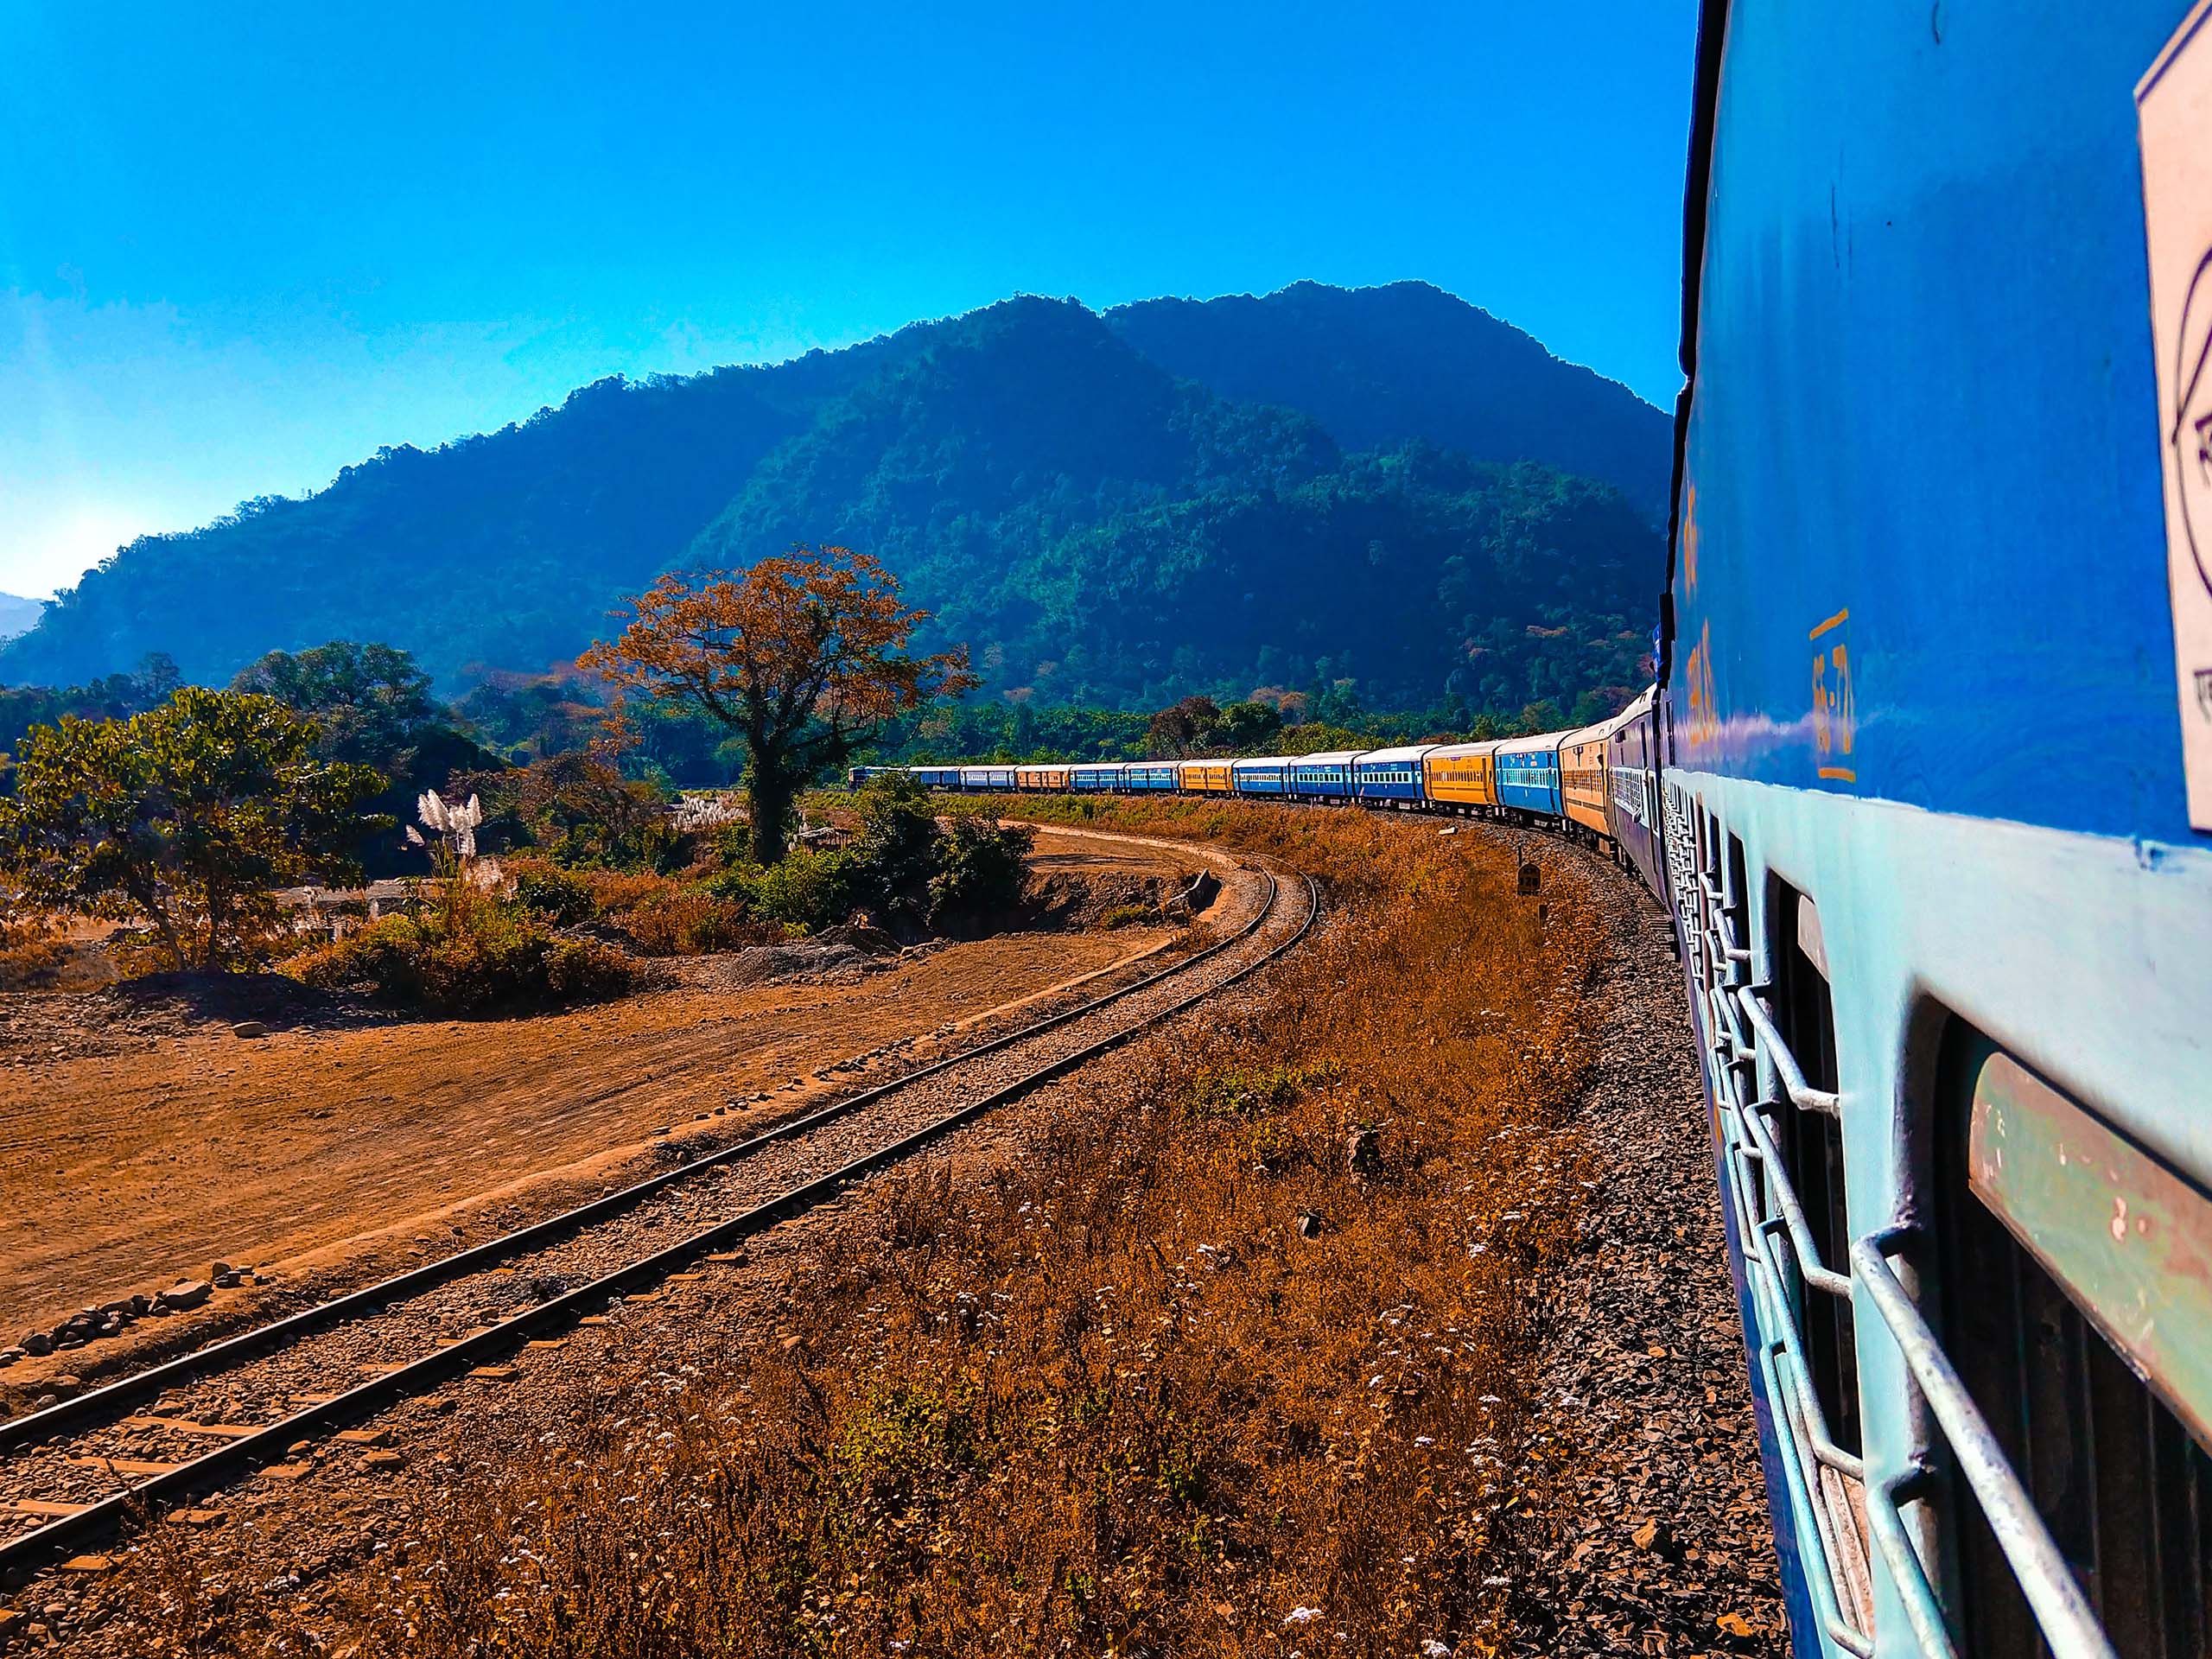 For a longer distance, look into booking a train